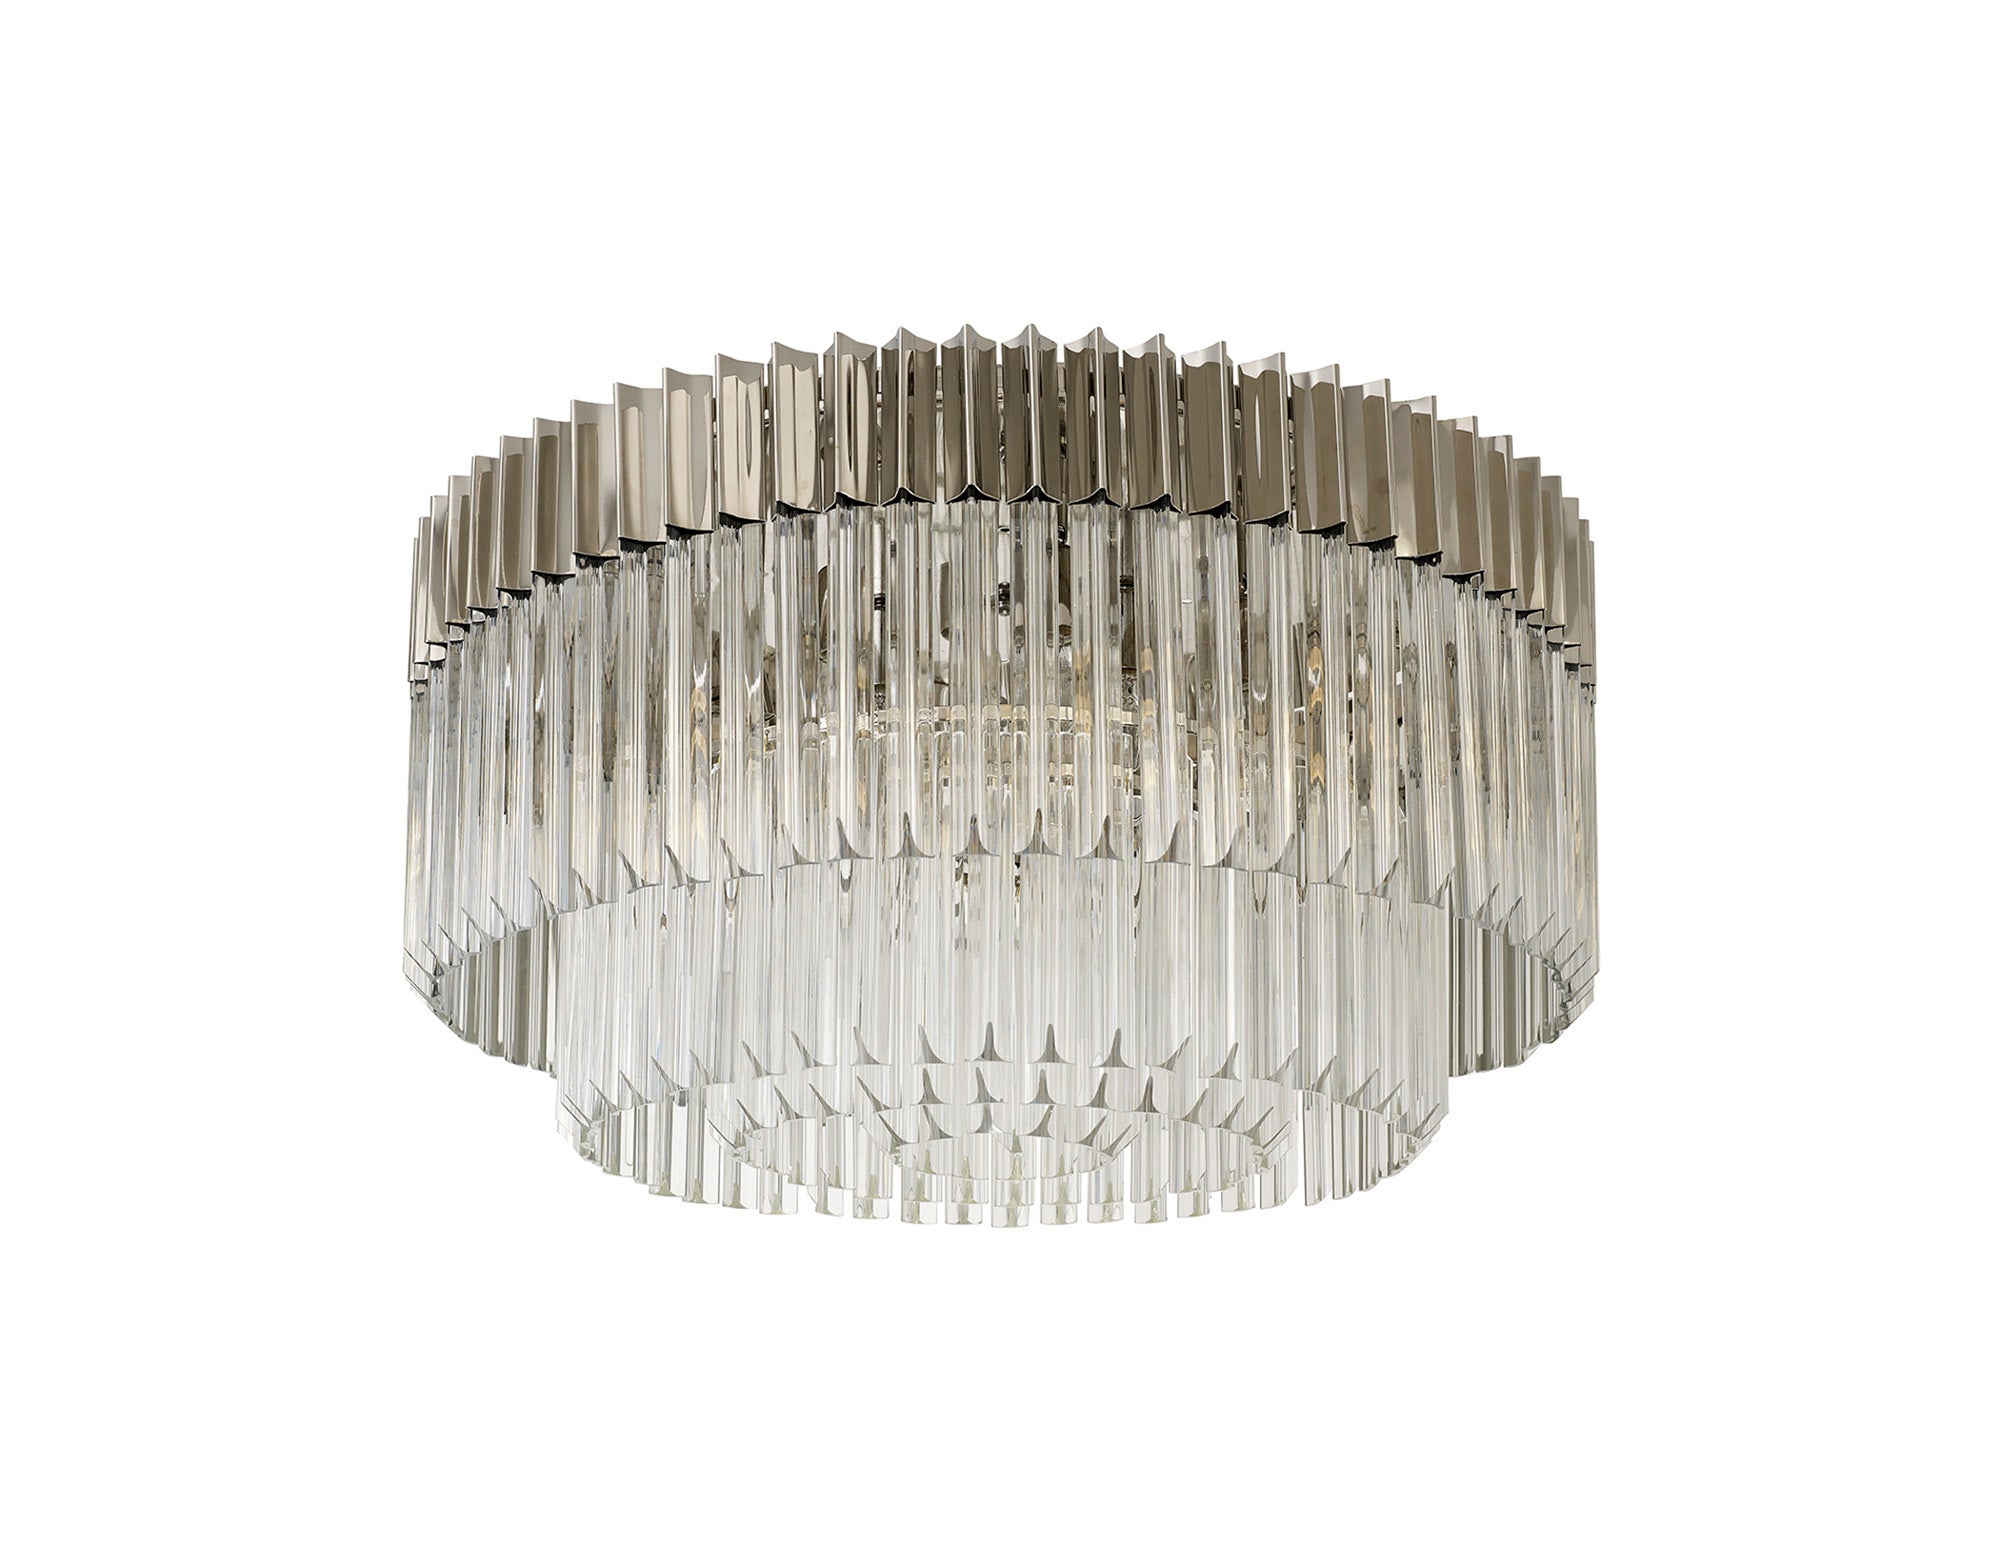 Knightsbridge Ceiling Round 12 Light E14, Polished Nickel/Clear Glass - LO182423.  Item Weight: 28.4kg